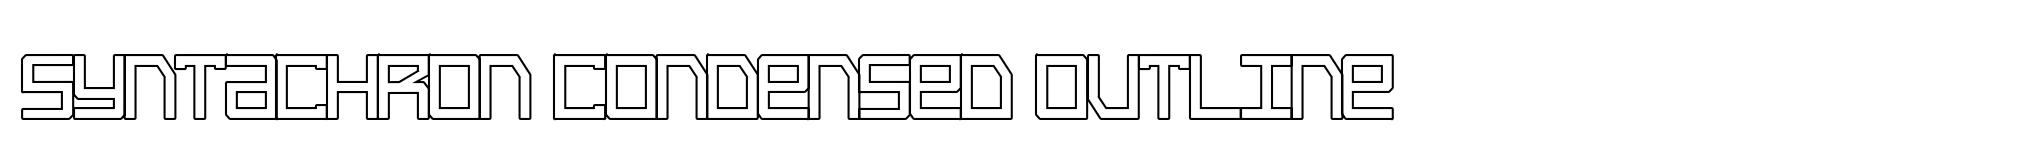 Syntachron Condensed Outline image